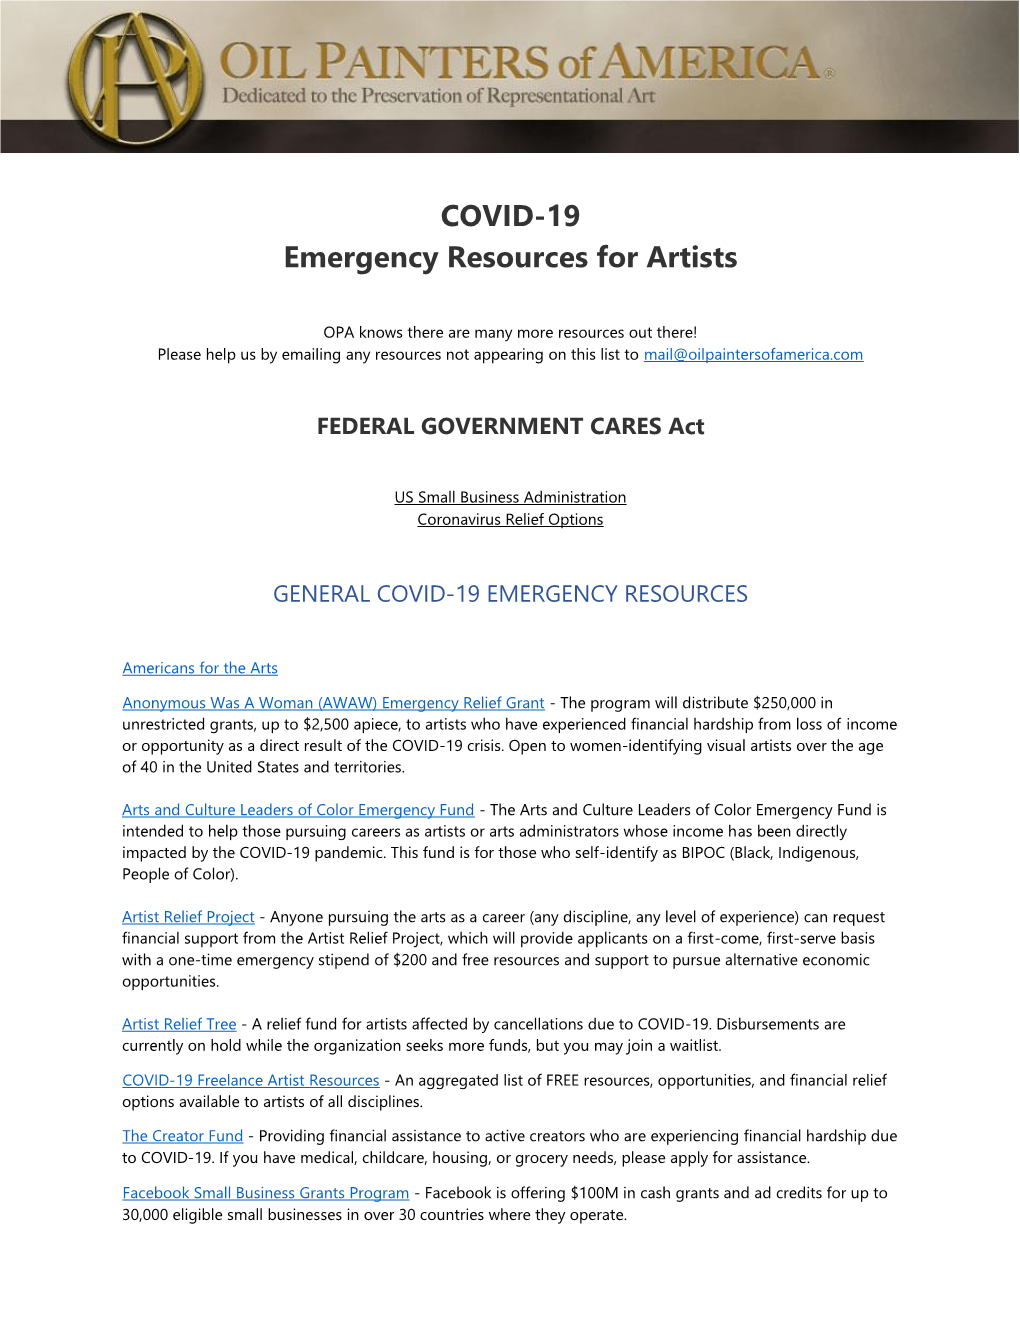 COVID-19 Emergency Resources for Artists